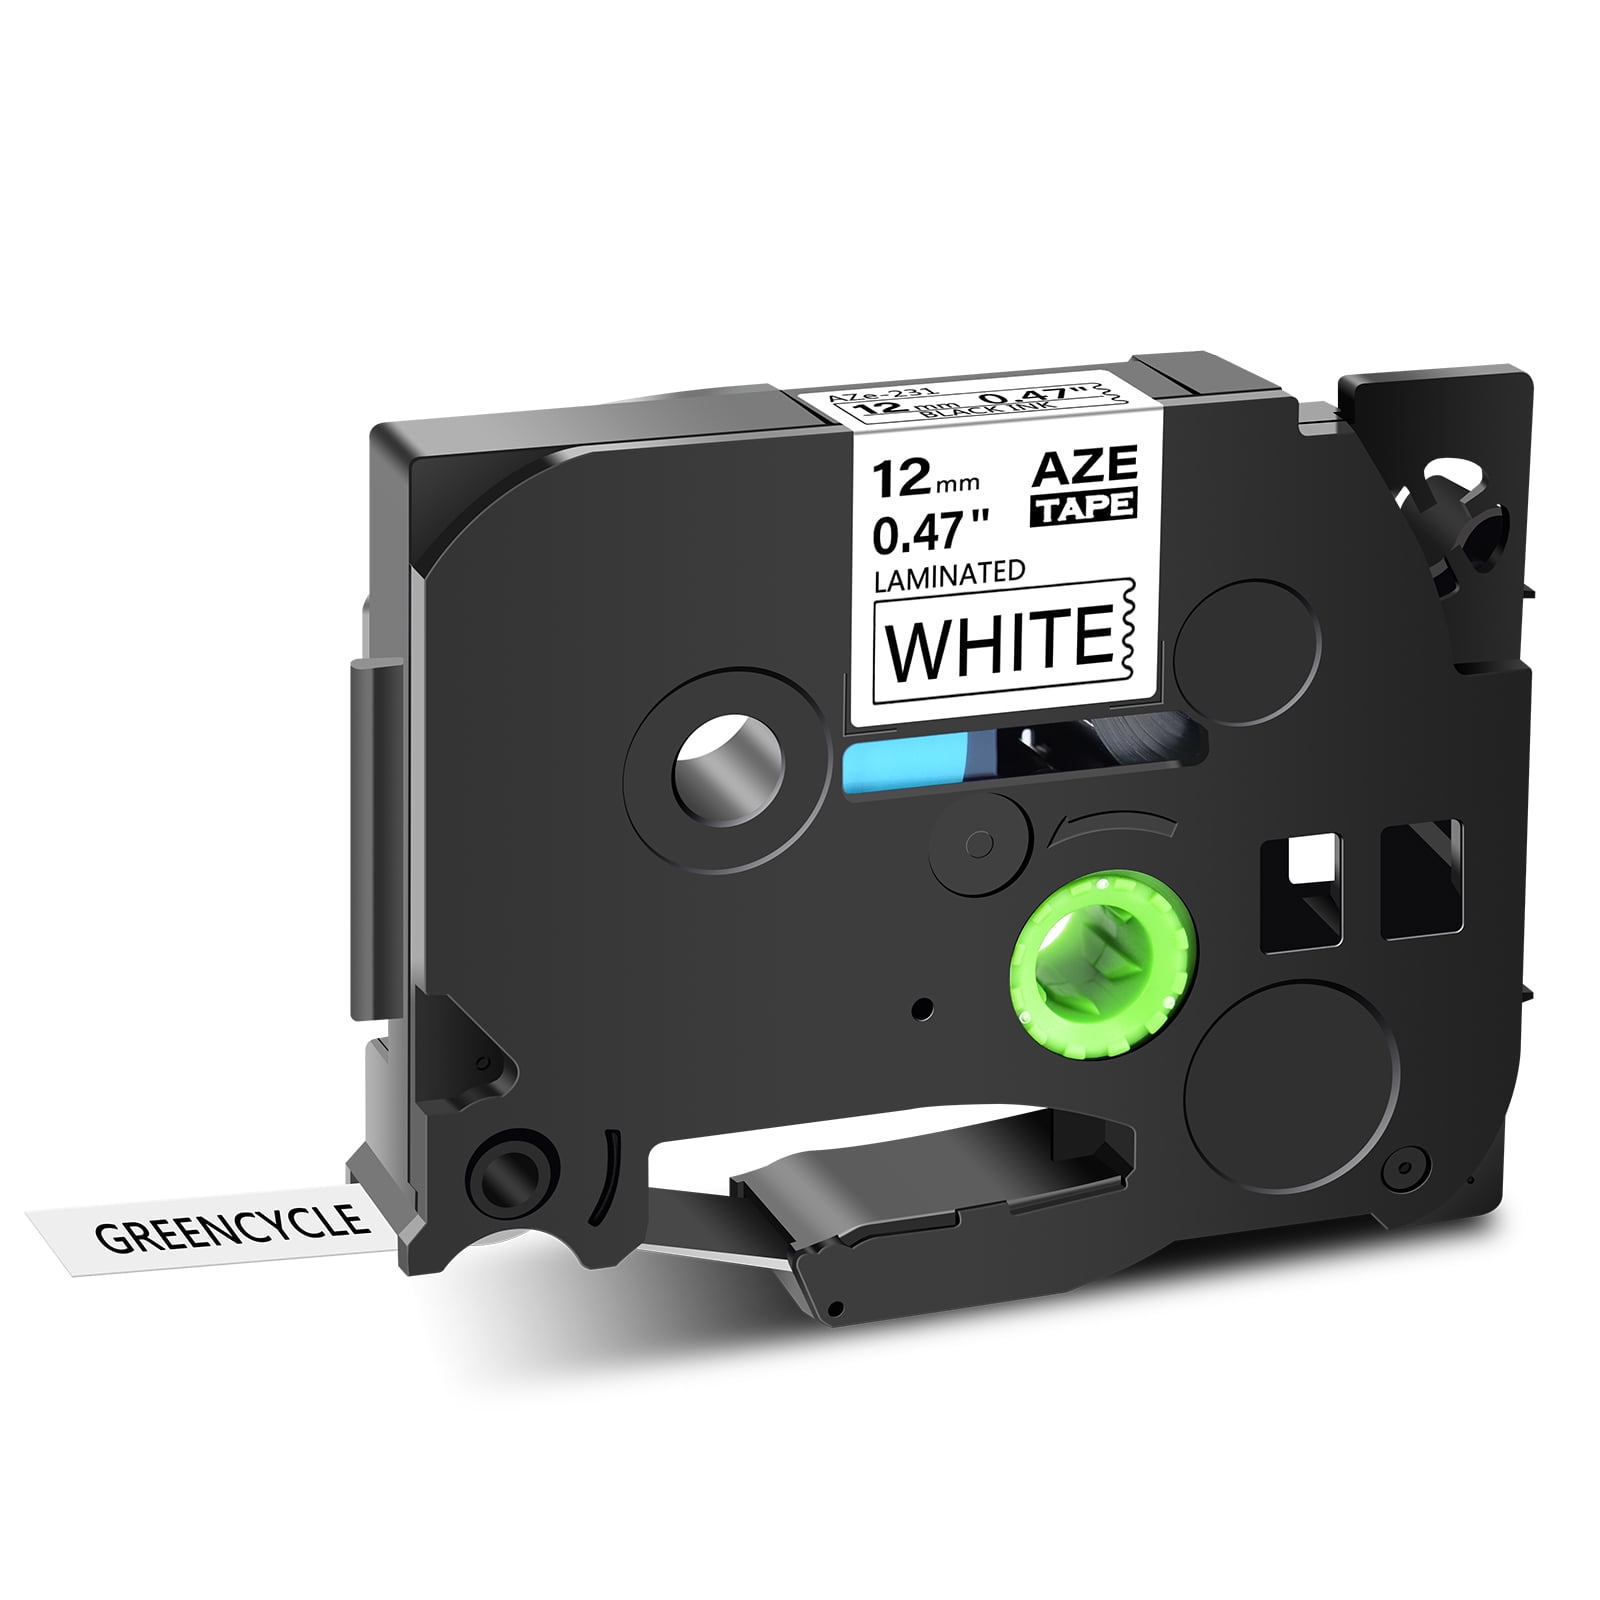 TZe-S231 TZ-S231 Black On White Label Tape For Brother P-Touch 12mm x 8m 1/2" 